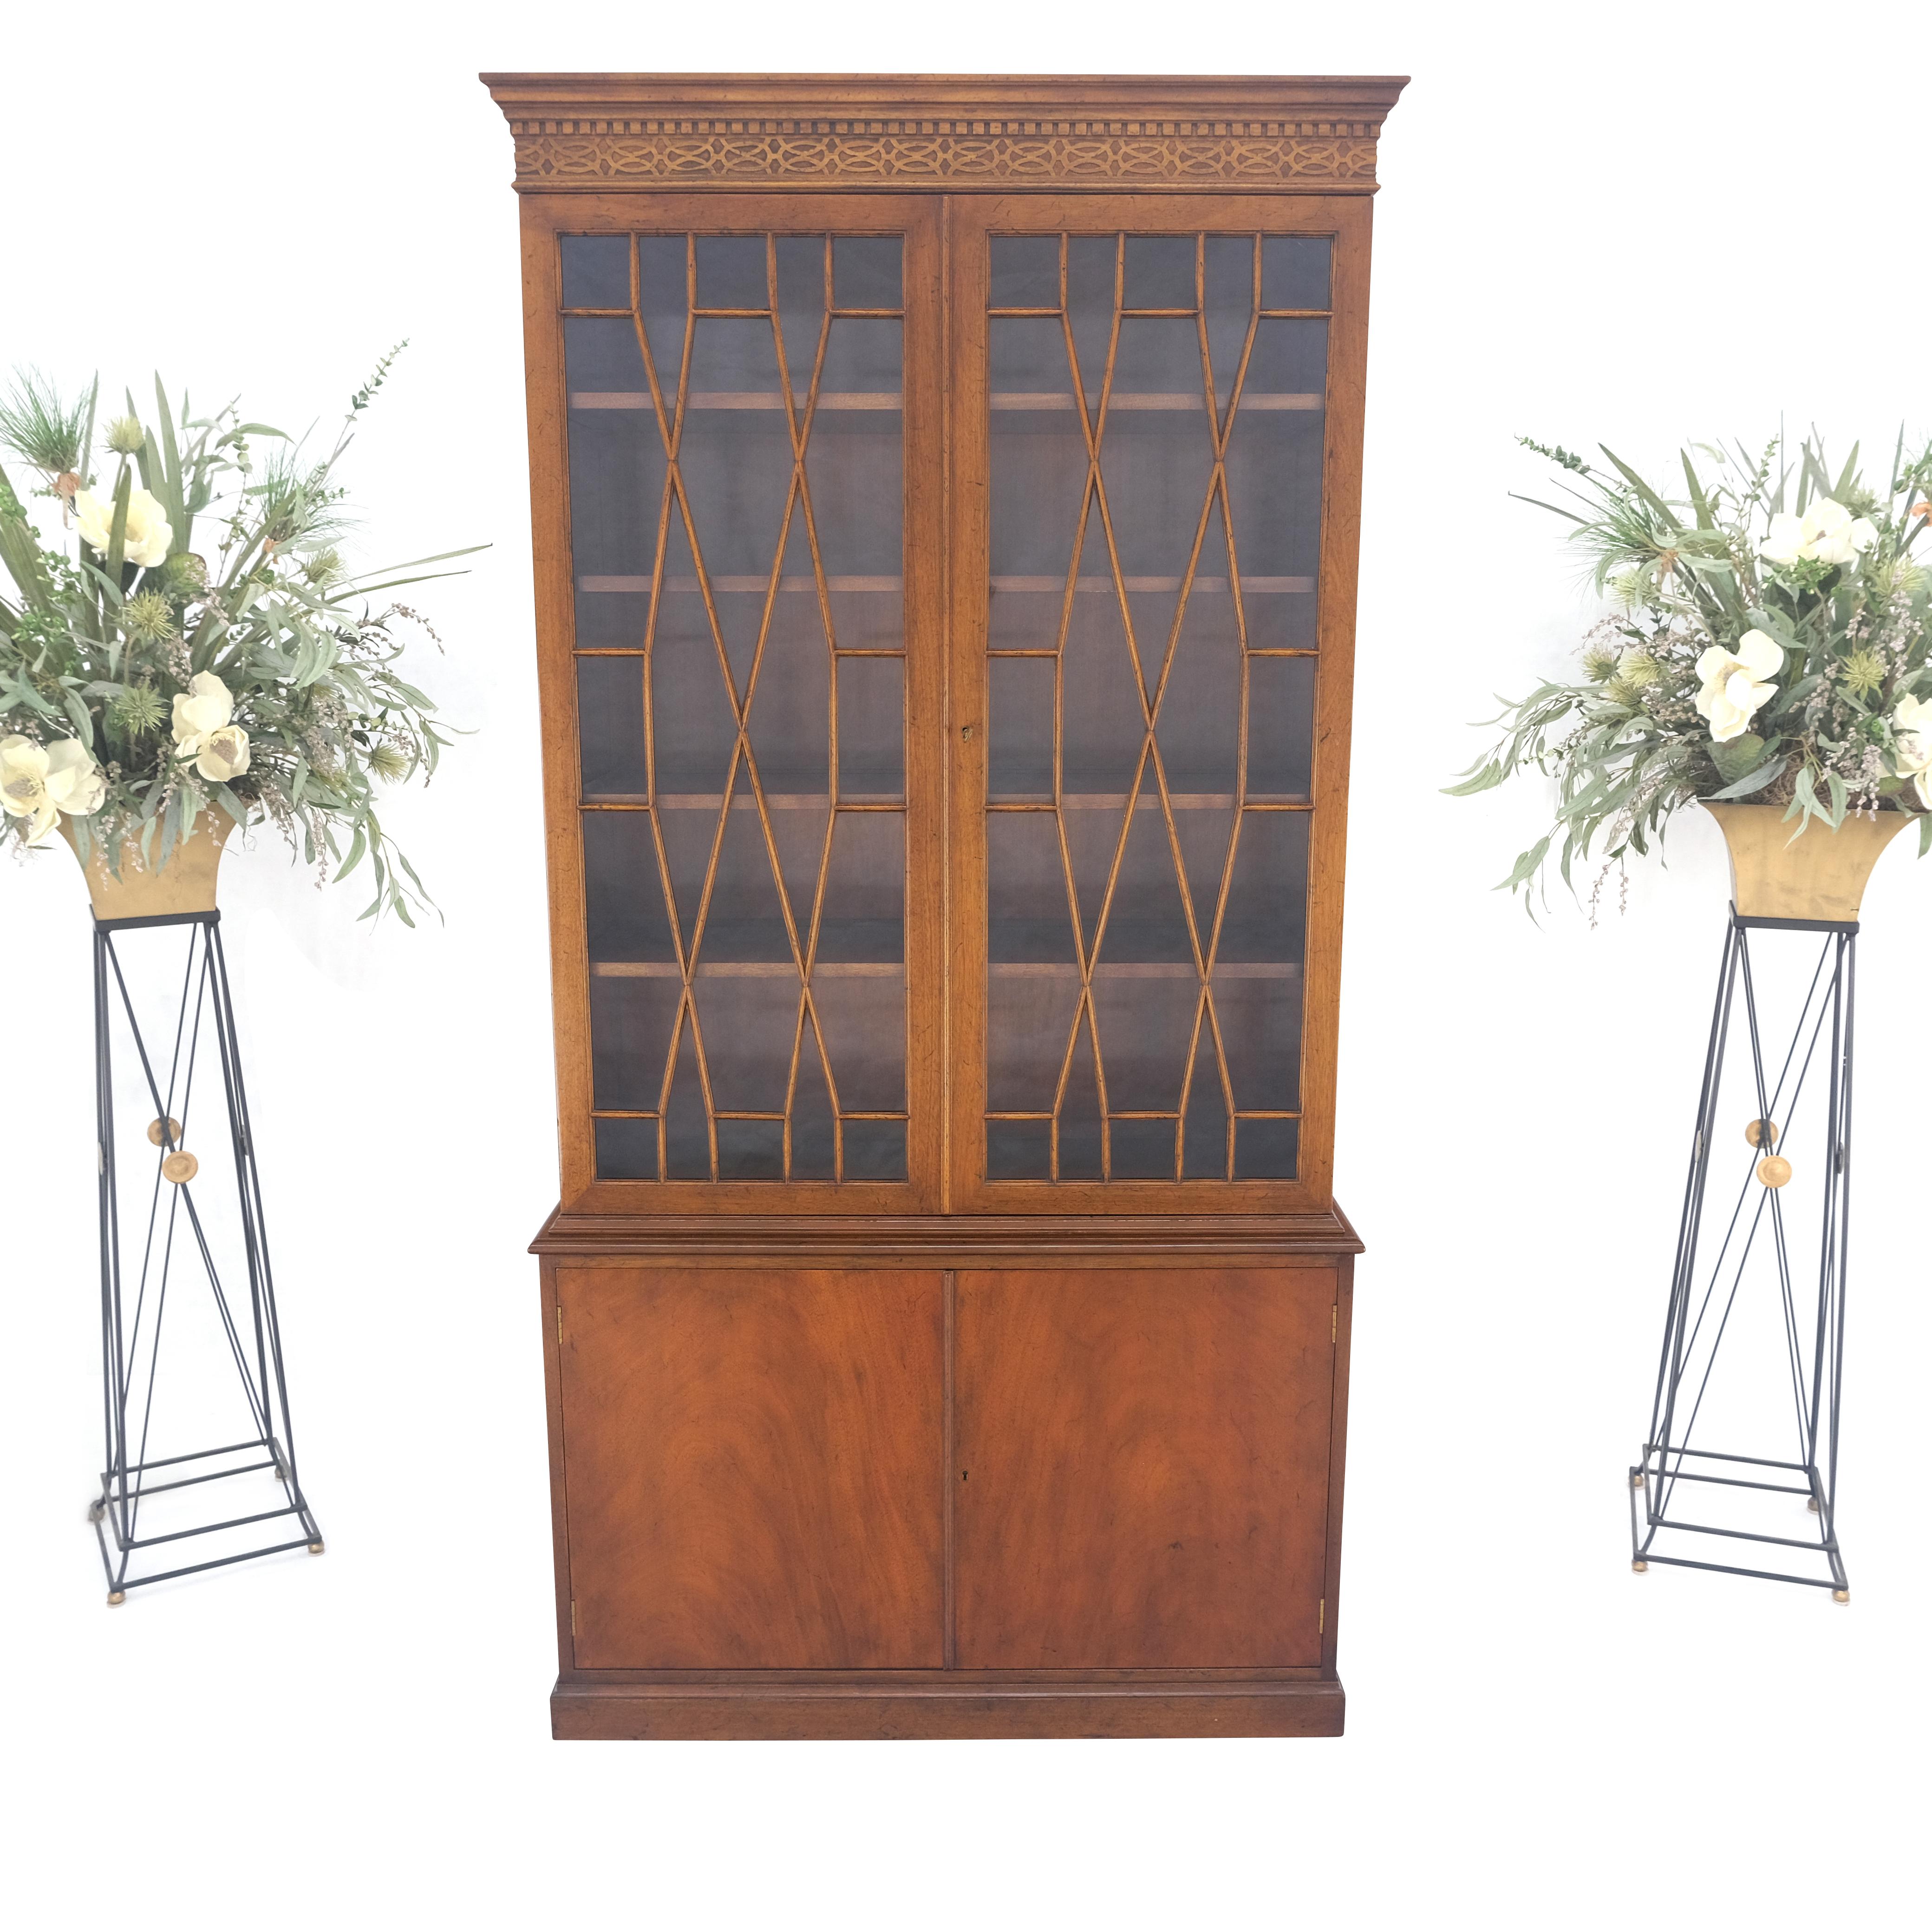 Mahogany Individual Pain Glass Double Door Bookcase Bottom Credenza Cabinet MINT In Good Condition For Sale In Rockaway, NJ